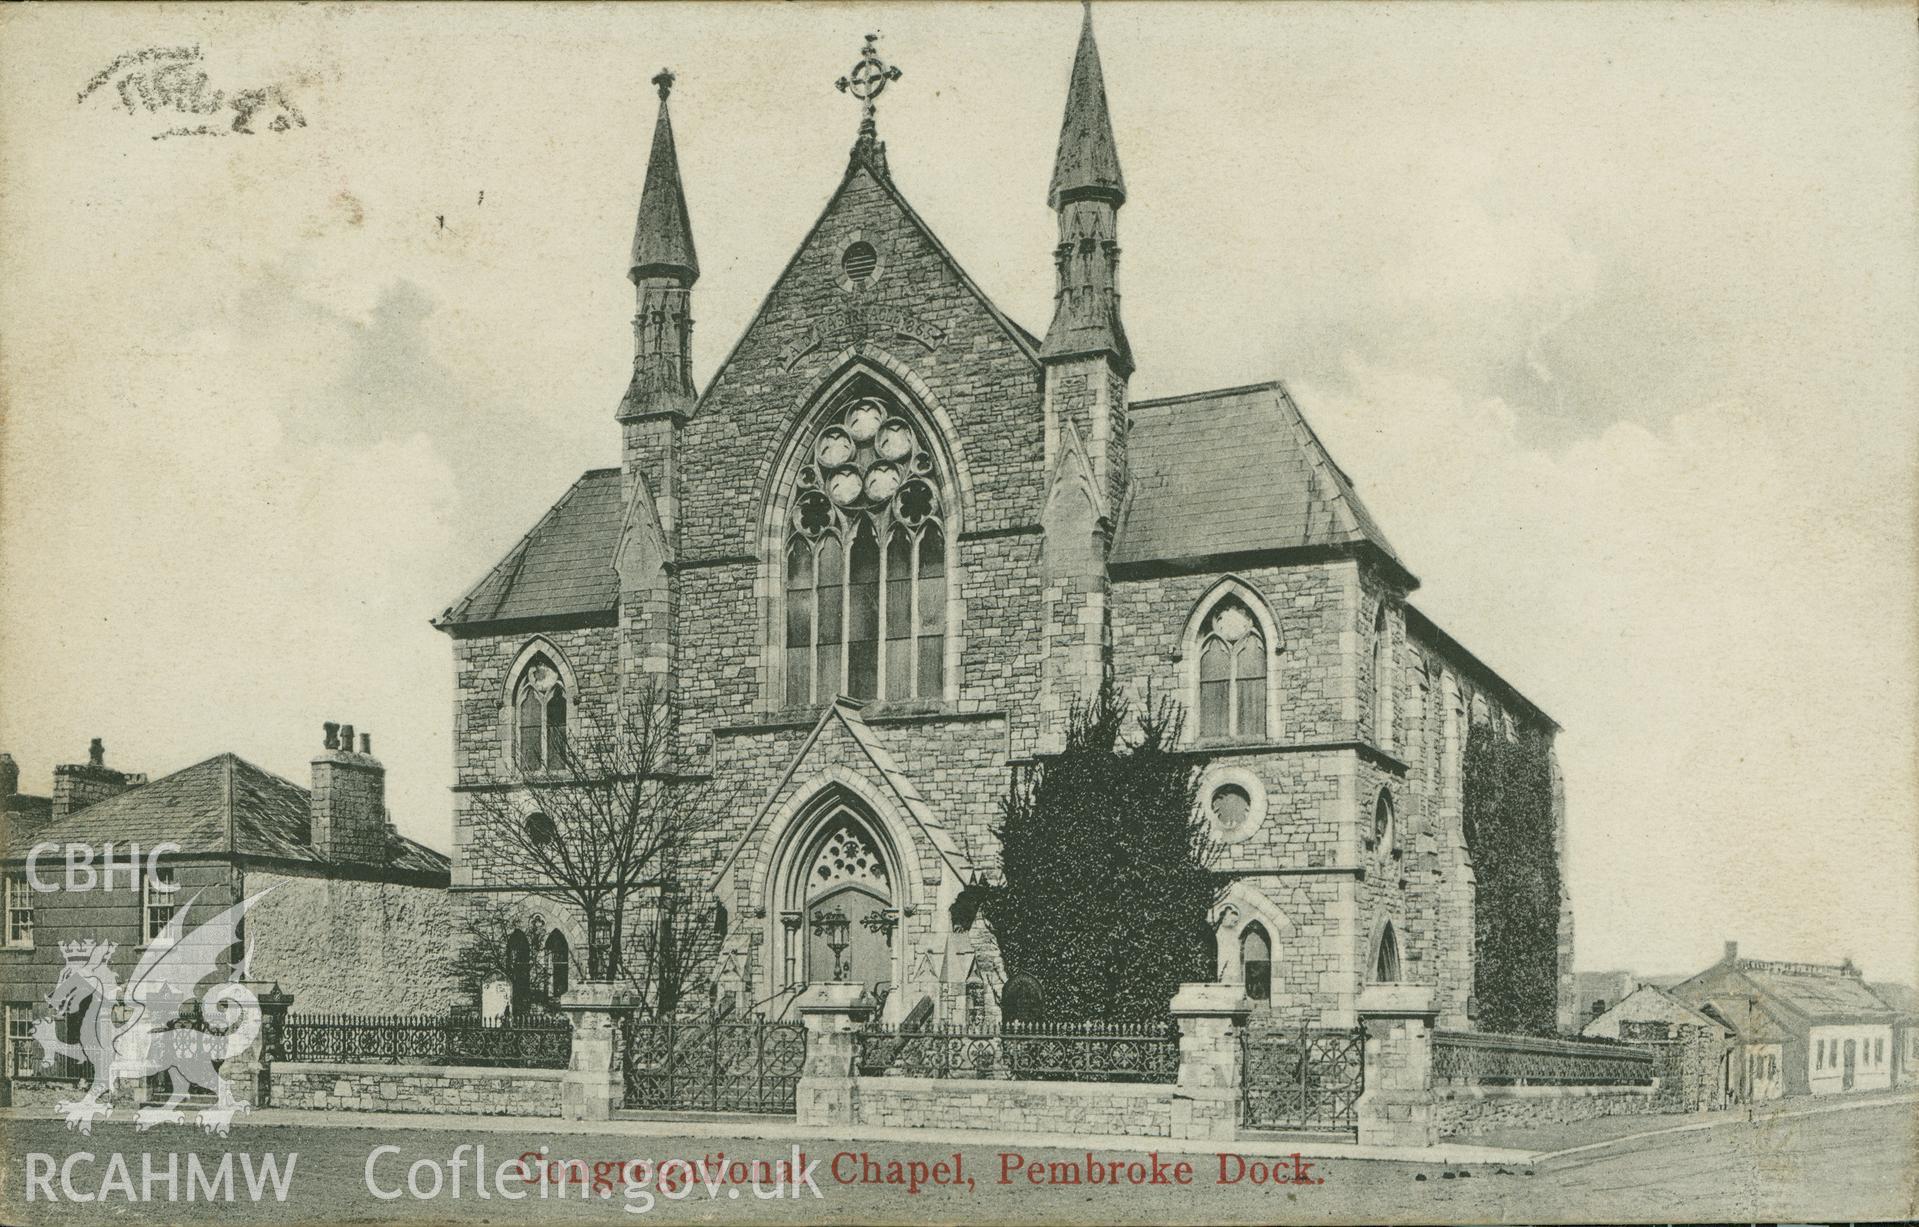 Digital copy of monochrome postcard showing exterior view of Albion Square Congregational chapel, Pembroke Dock. Franked on 23rd July 1906. Loaned for copying by Thomas Lloyd.